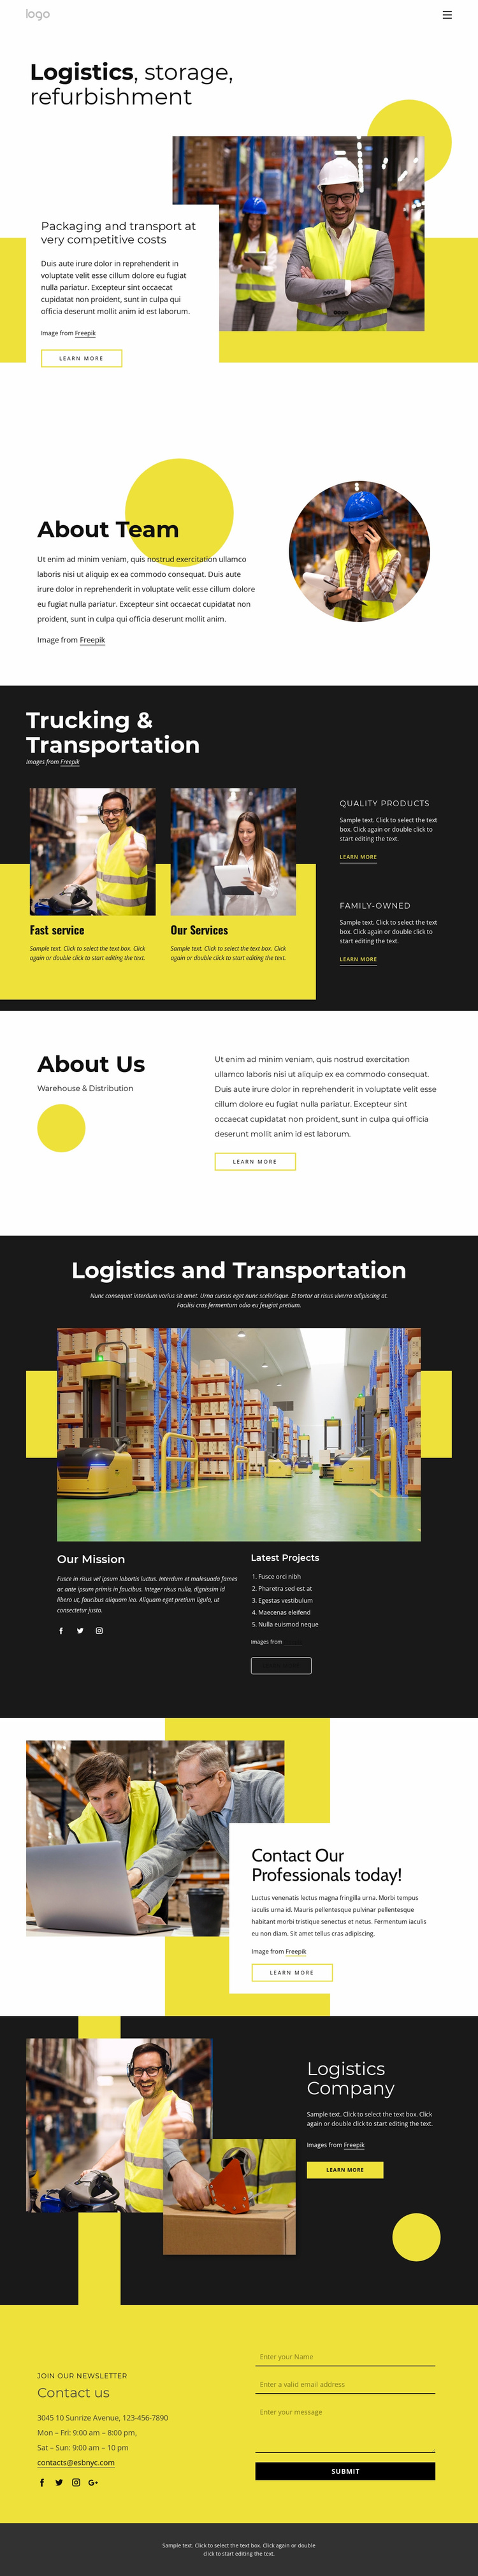 Contact our professionals today Website Template